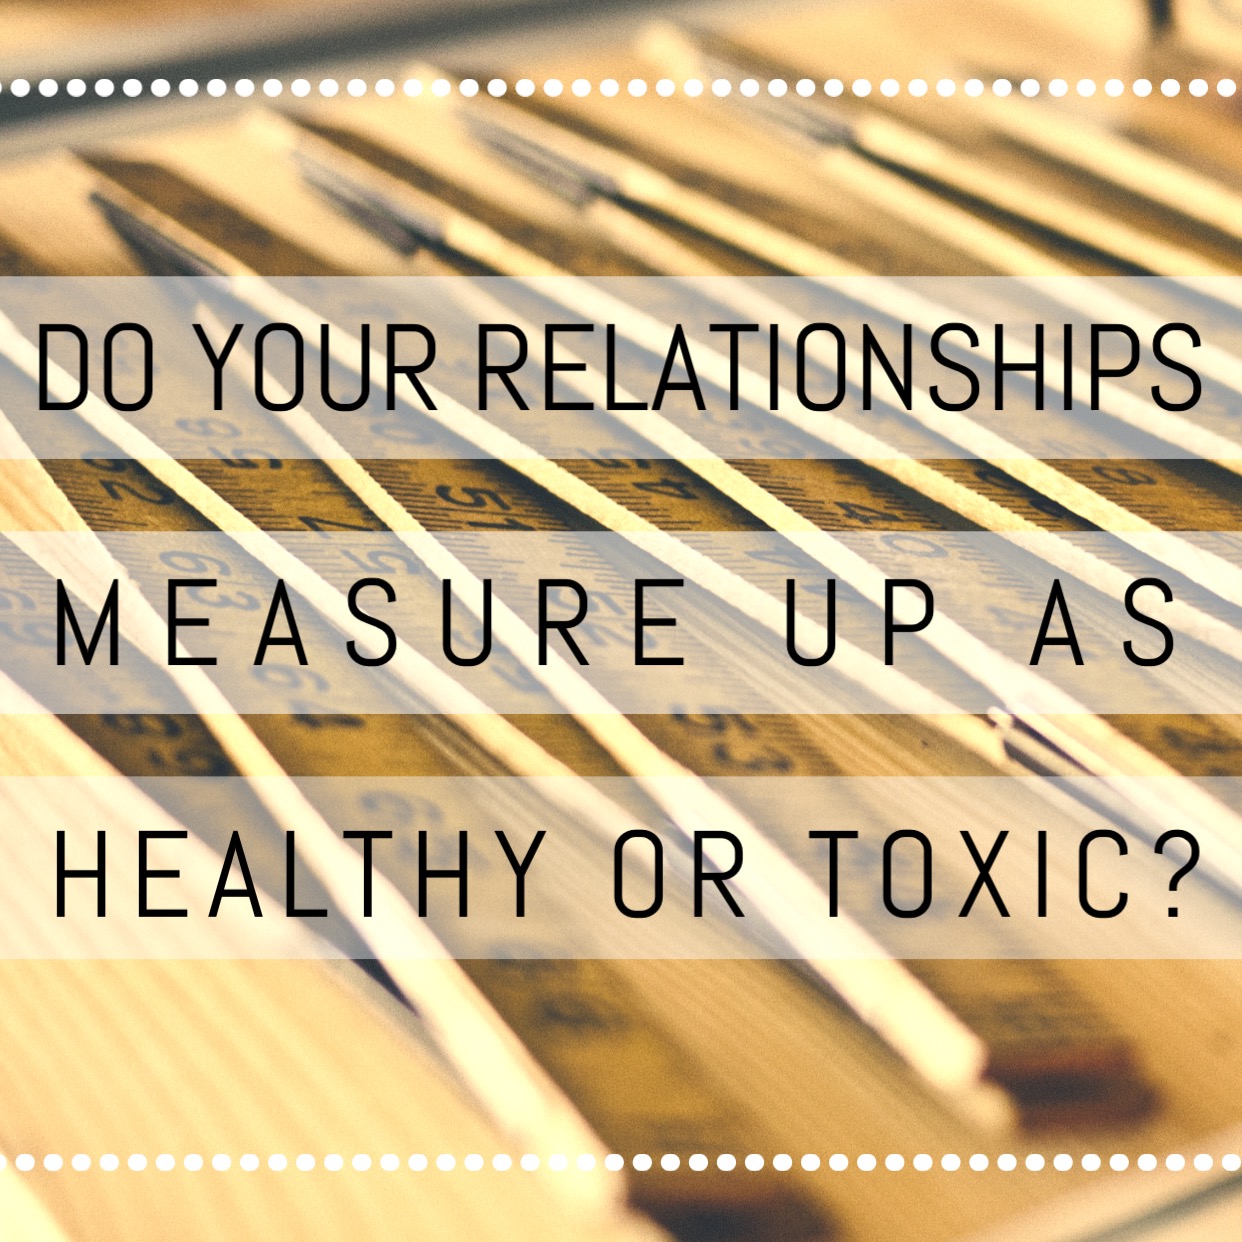 Do Your Relationships Measure Up as Healthy or Toxic?